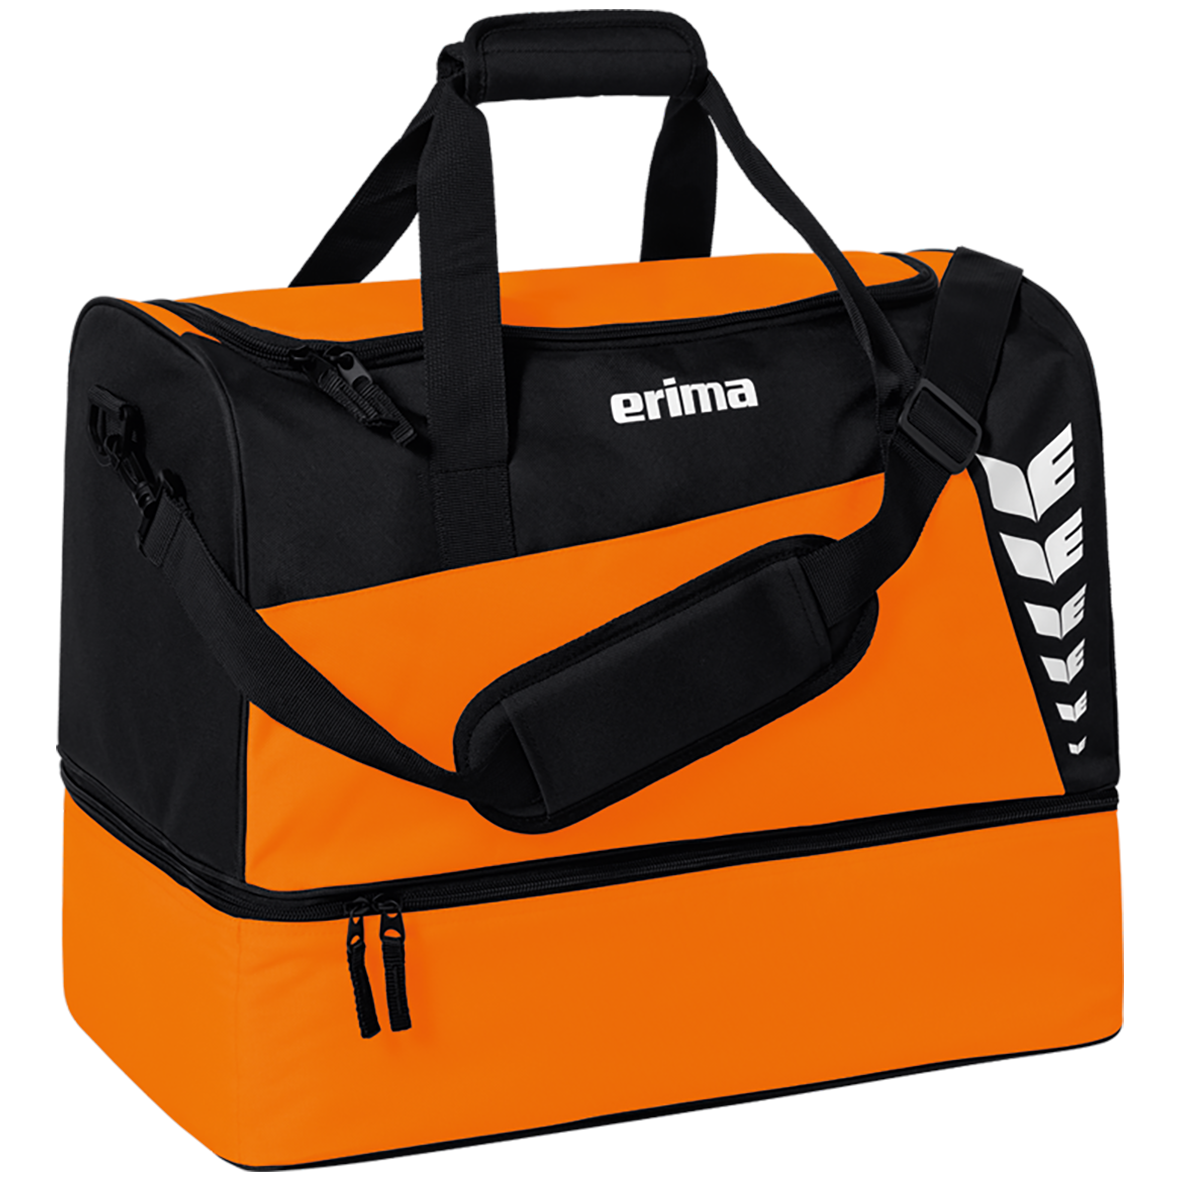 ERIMA SIX WINGS SPORTS BAG WITH BOTTOM COMPARTMENT, ORANGE-BLACK.